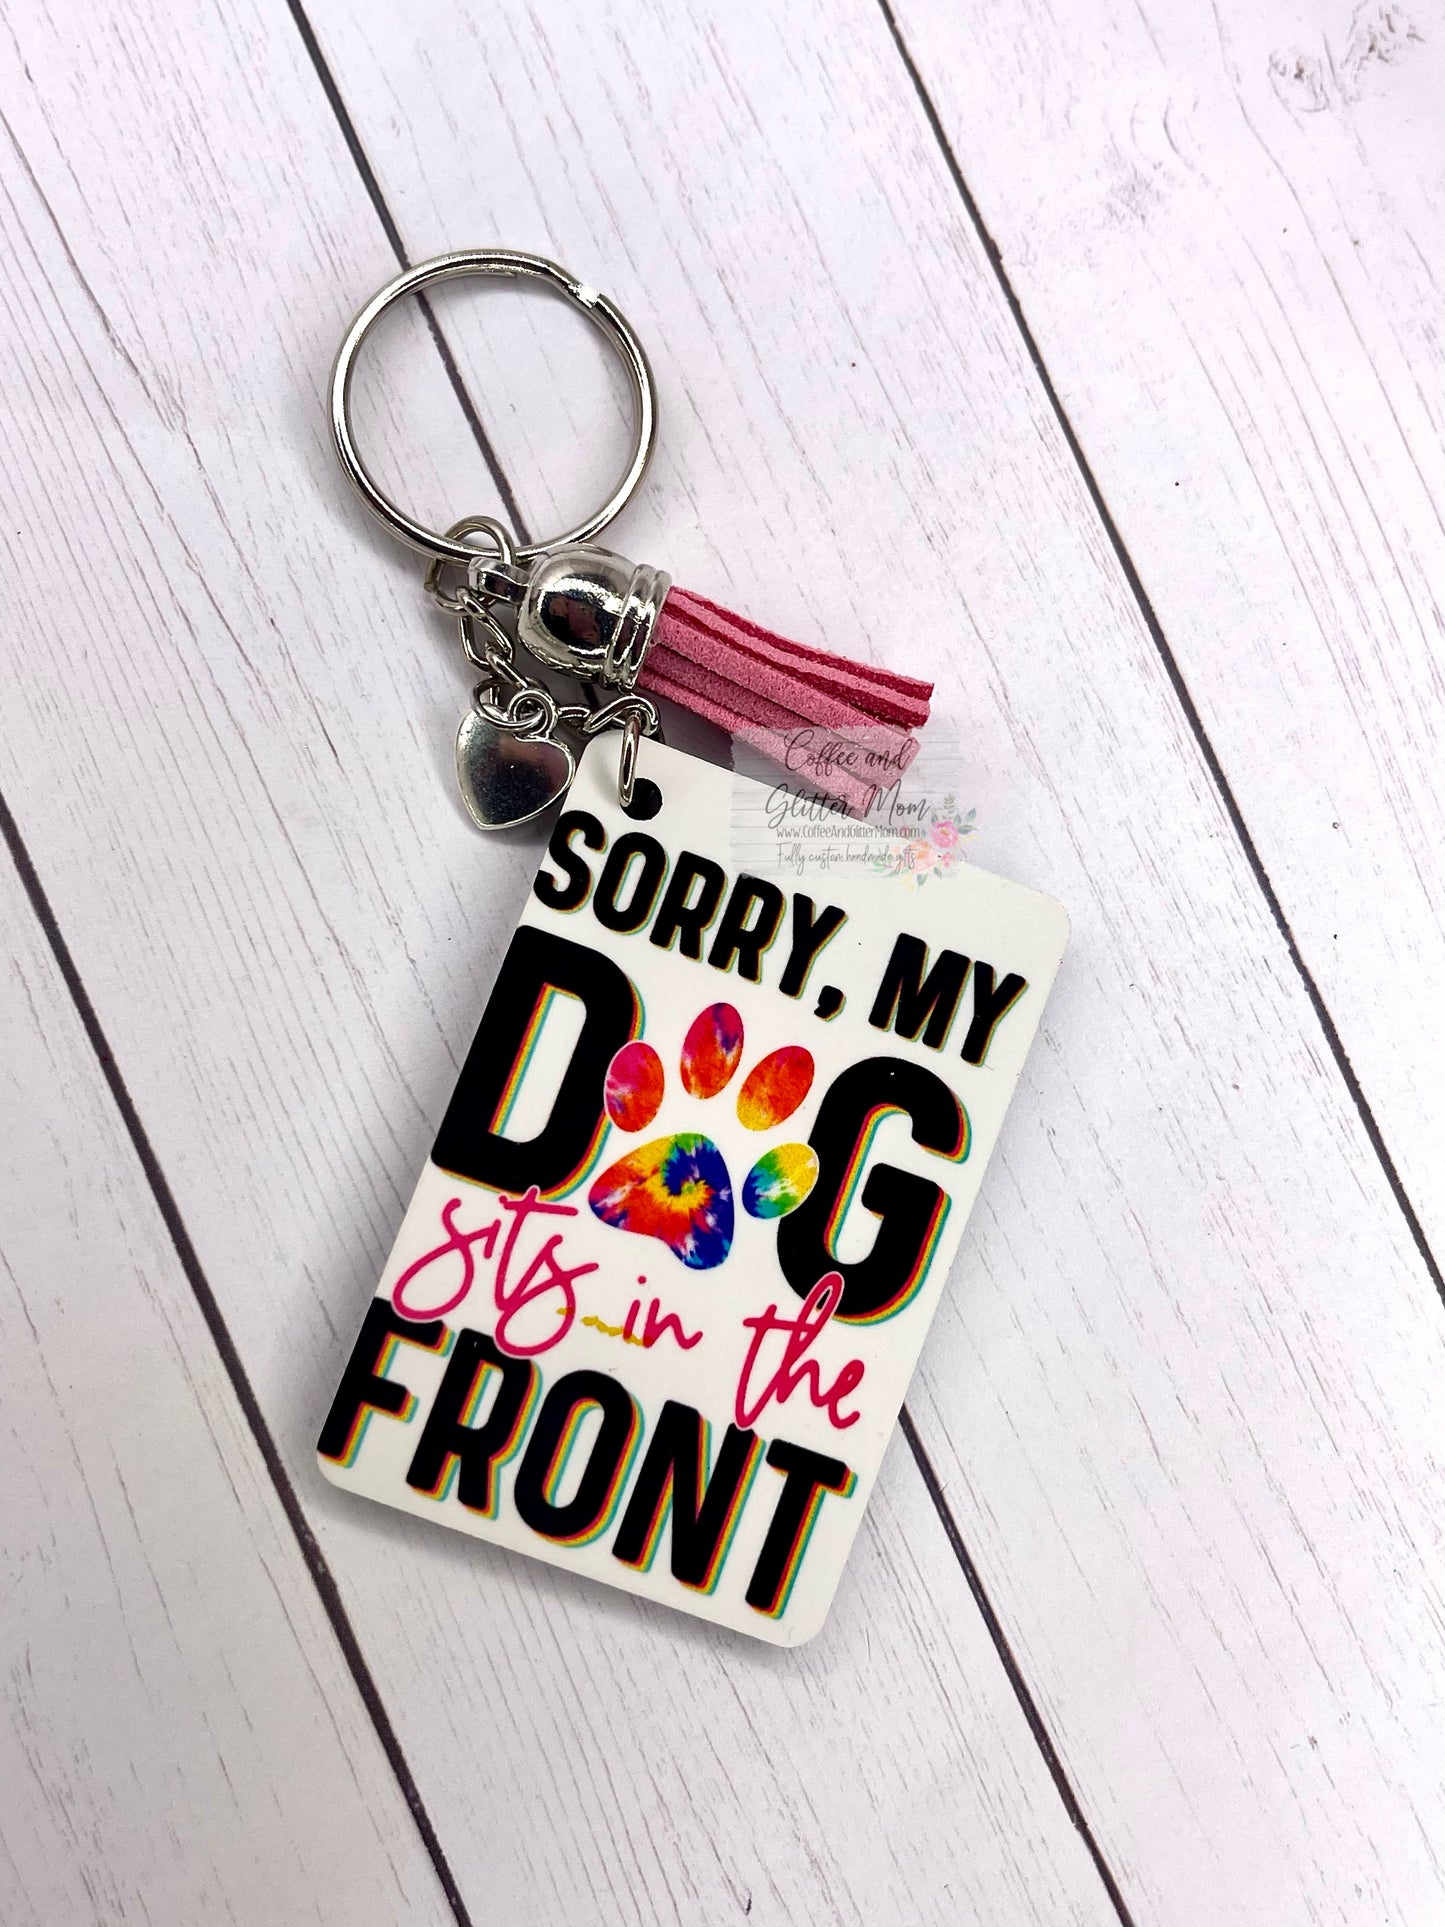 Dog Sits In Front Keychain